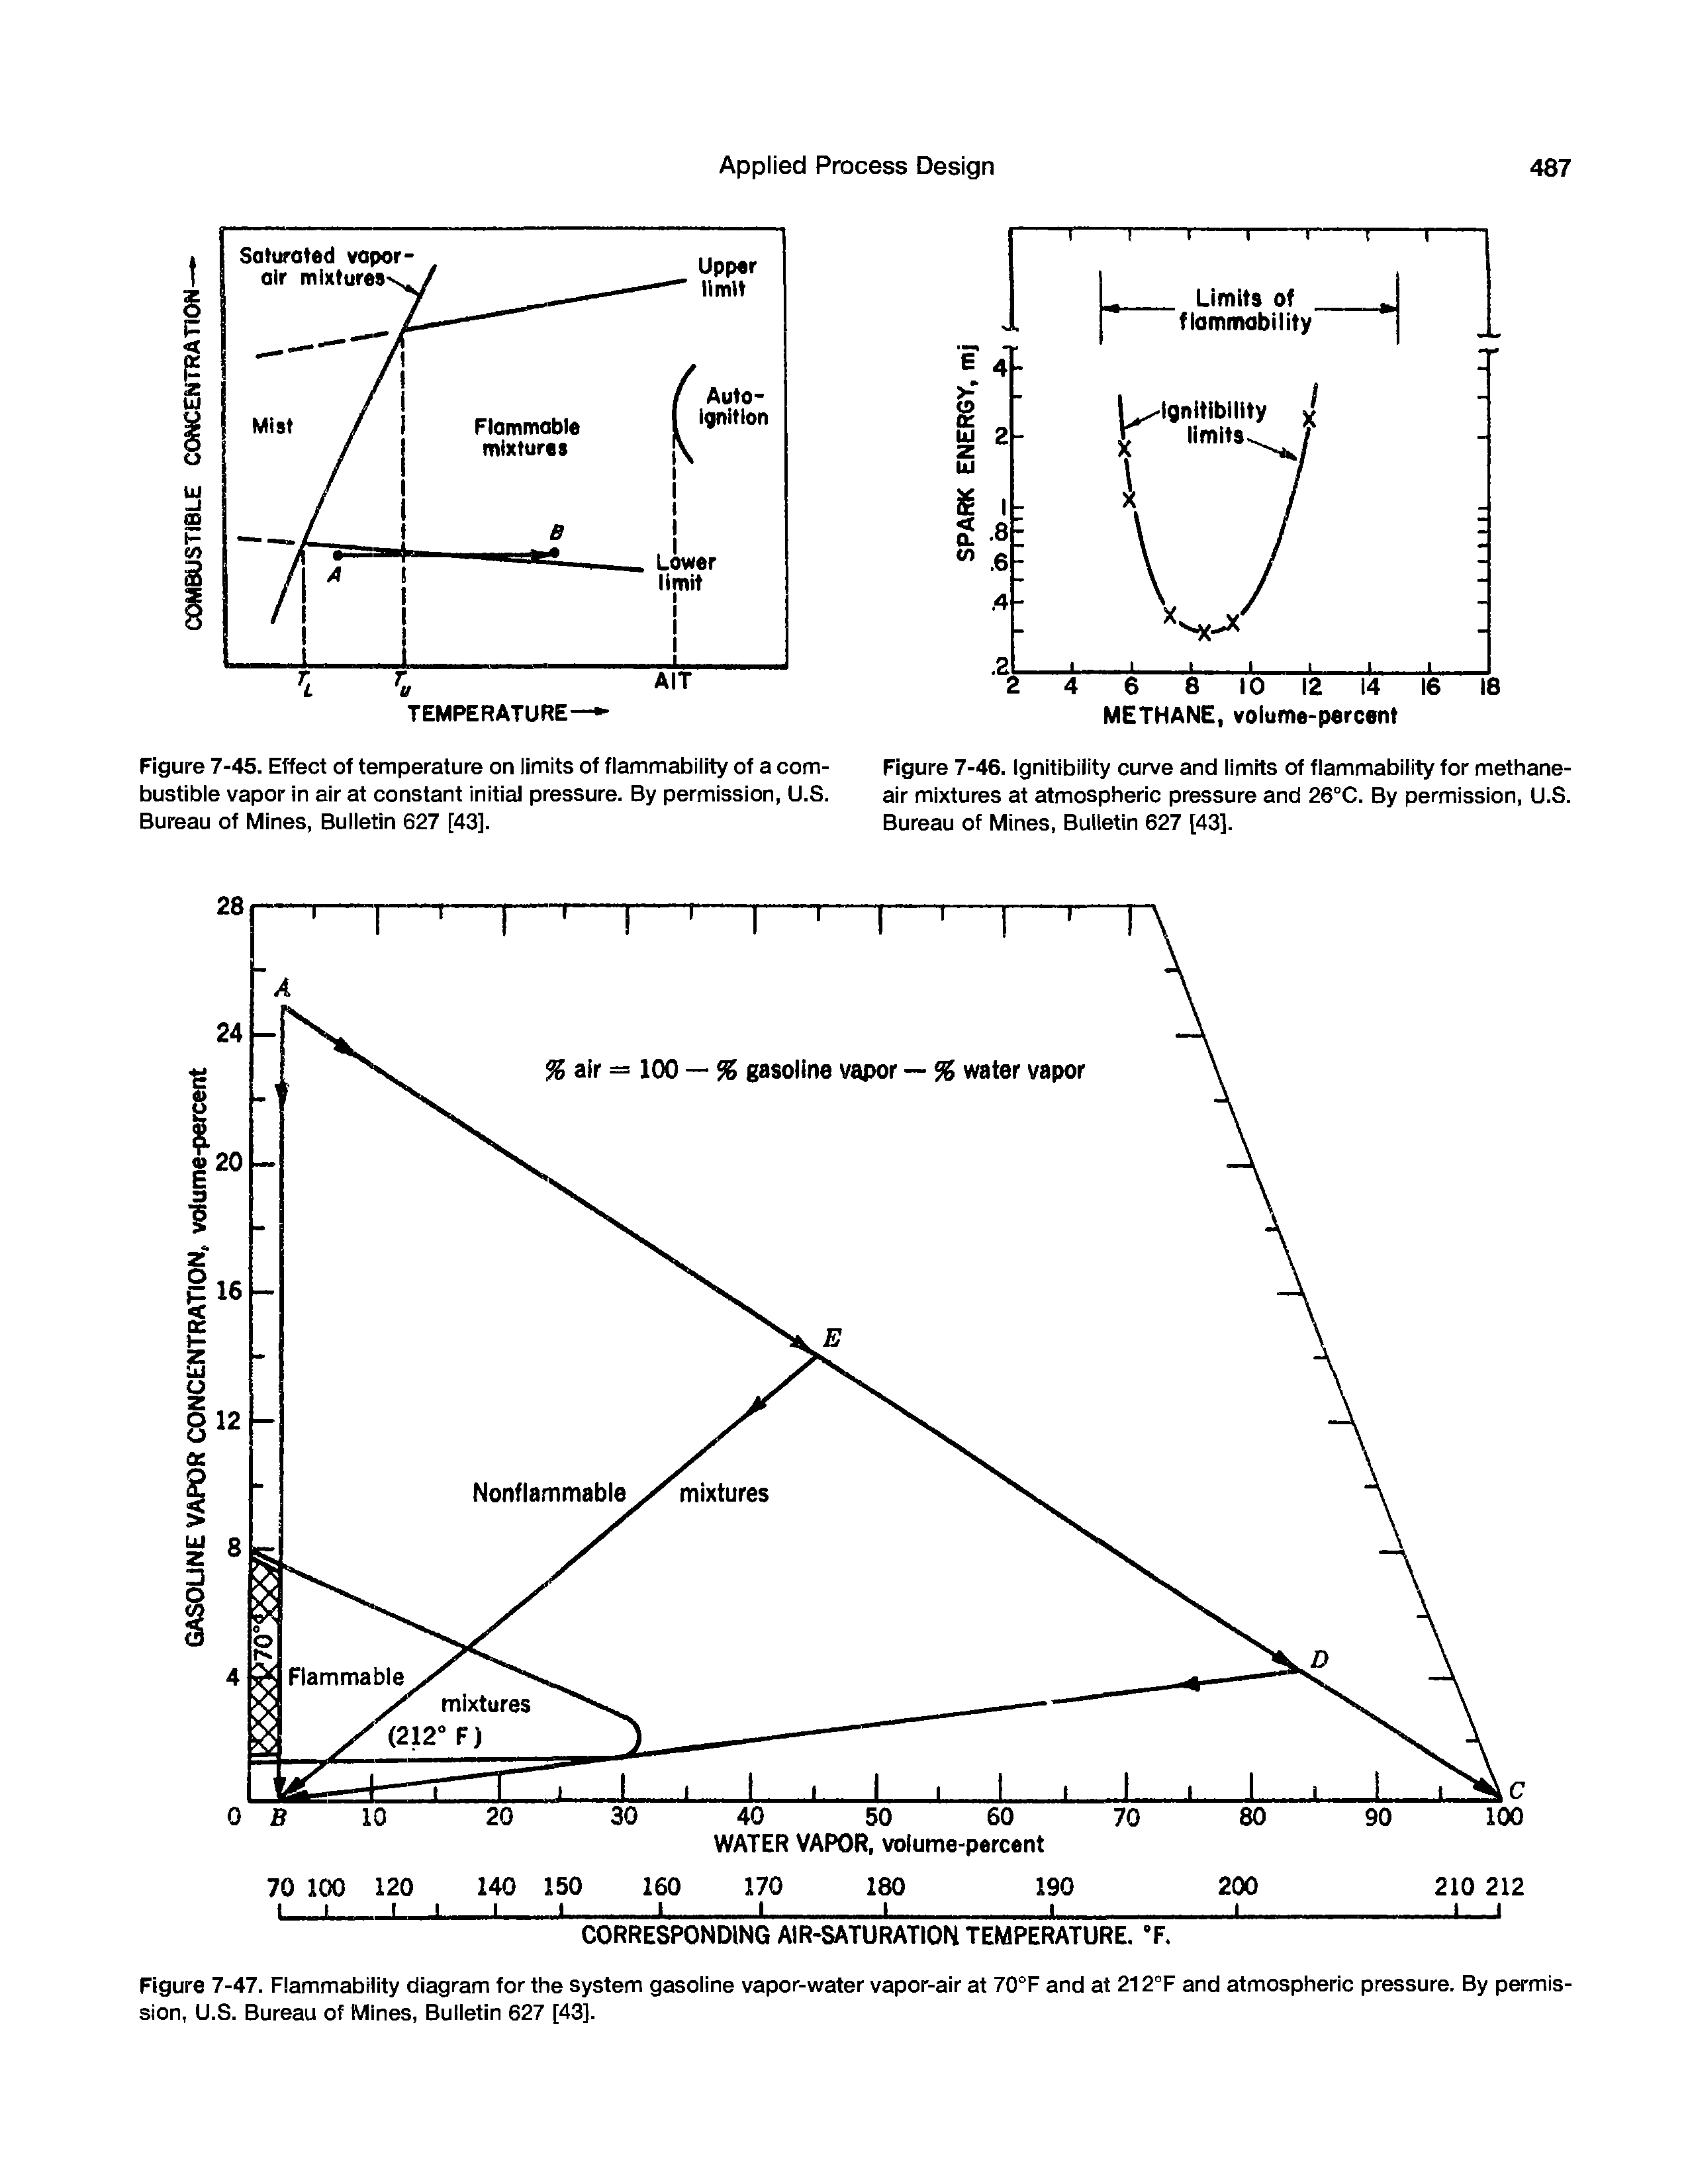 Figure 7-46. Ignitibiiity curve and limits of flammability for methane-air mixtures at atmospheric pressure and 26°C. By permission, U.S. Bureau of Mines, Bulletin 627 [43].